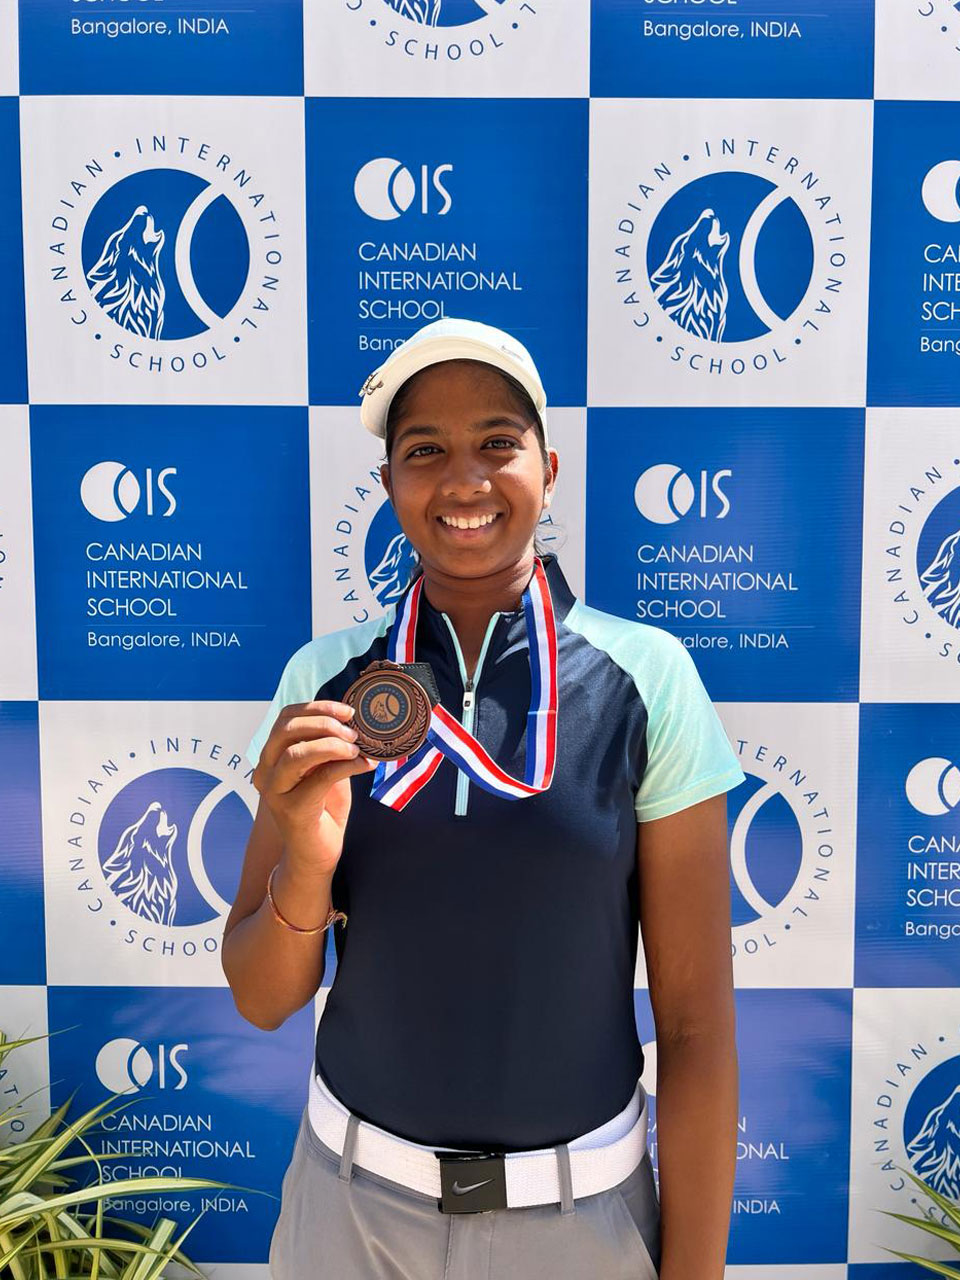 Kaya Daluwatte finished 3rd in the 'A' Girls category held at the CIS interschool Golf Championship held at Prestige Augusta Golf Village in Bangalore.